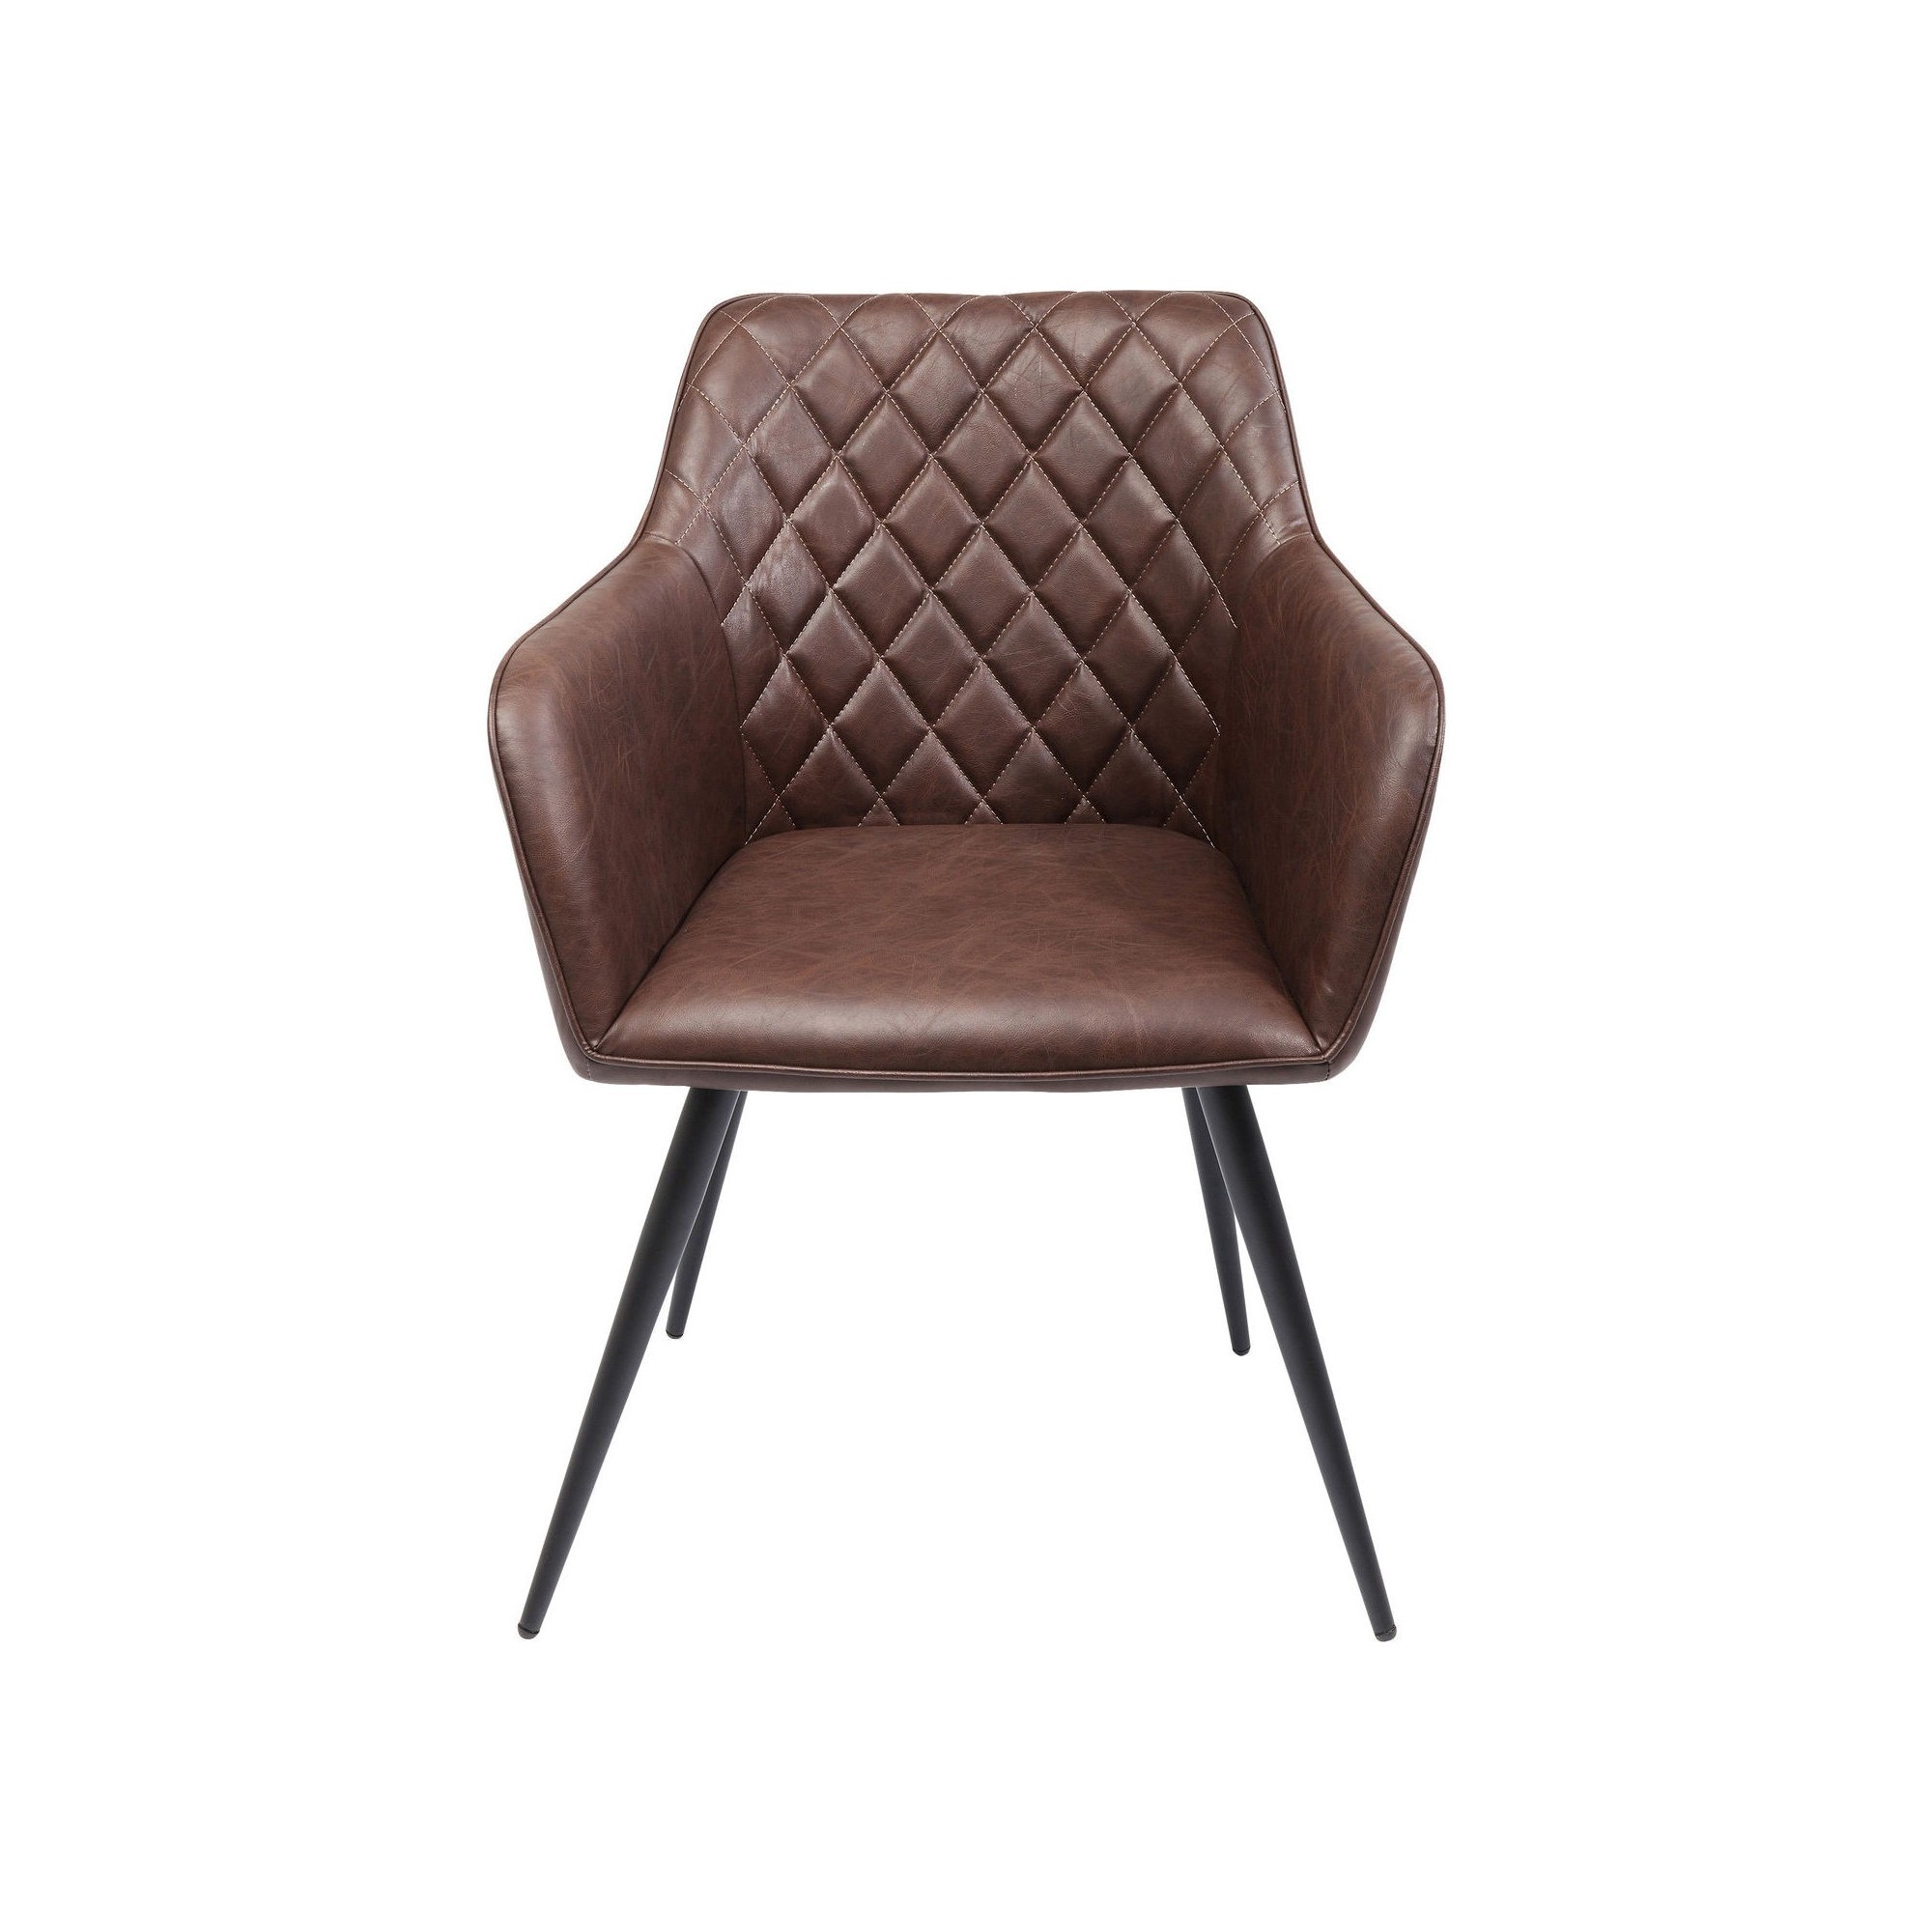 Chair with Armrest San Remo Kare Design